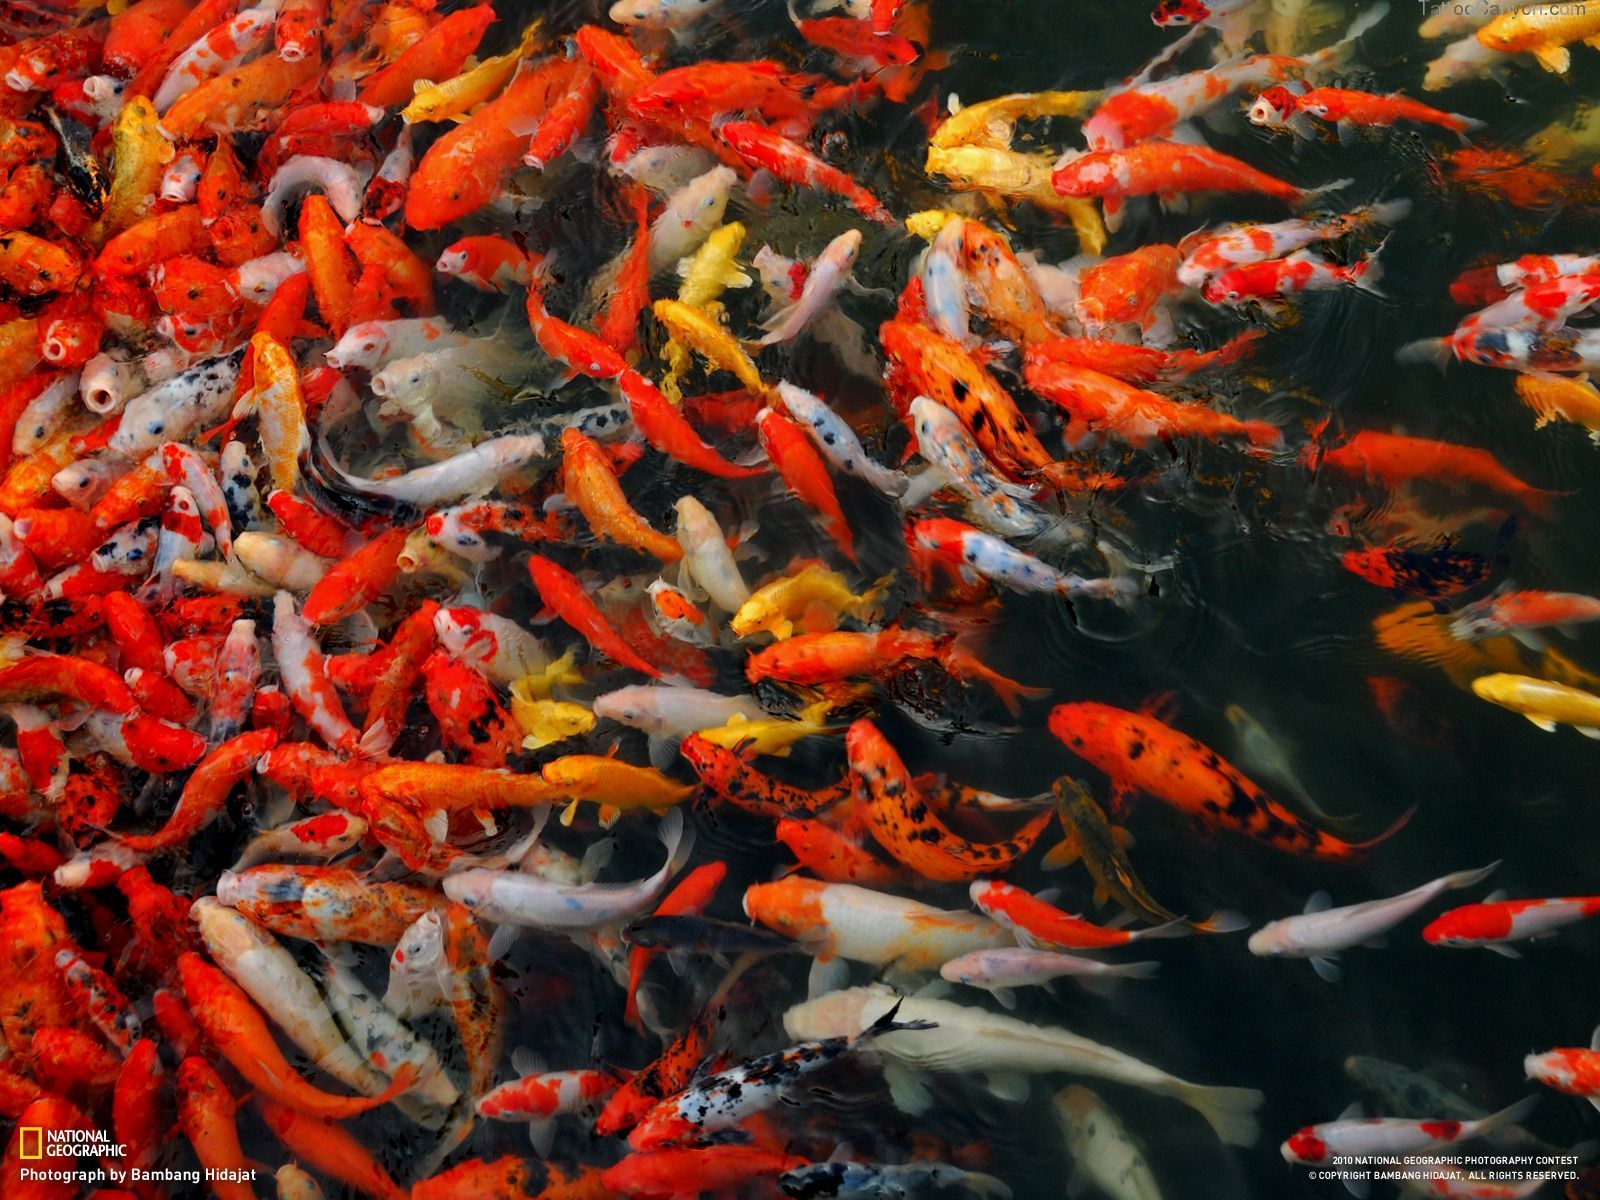 How to Breed Koi Fish: A Full Guide